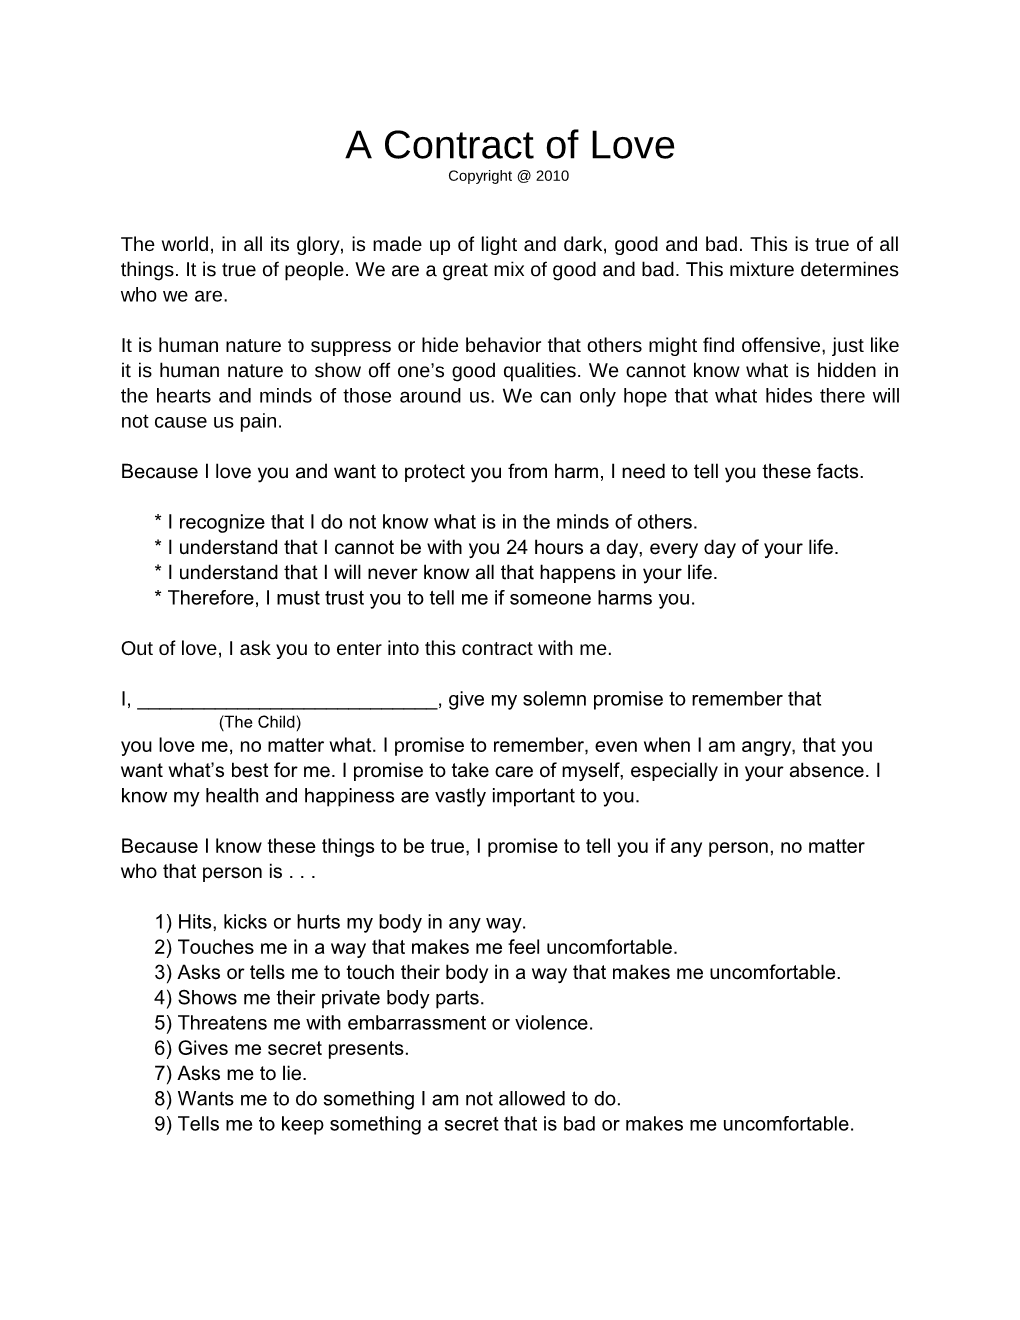 A Contract of Love